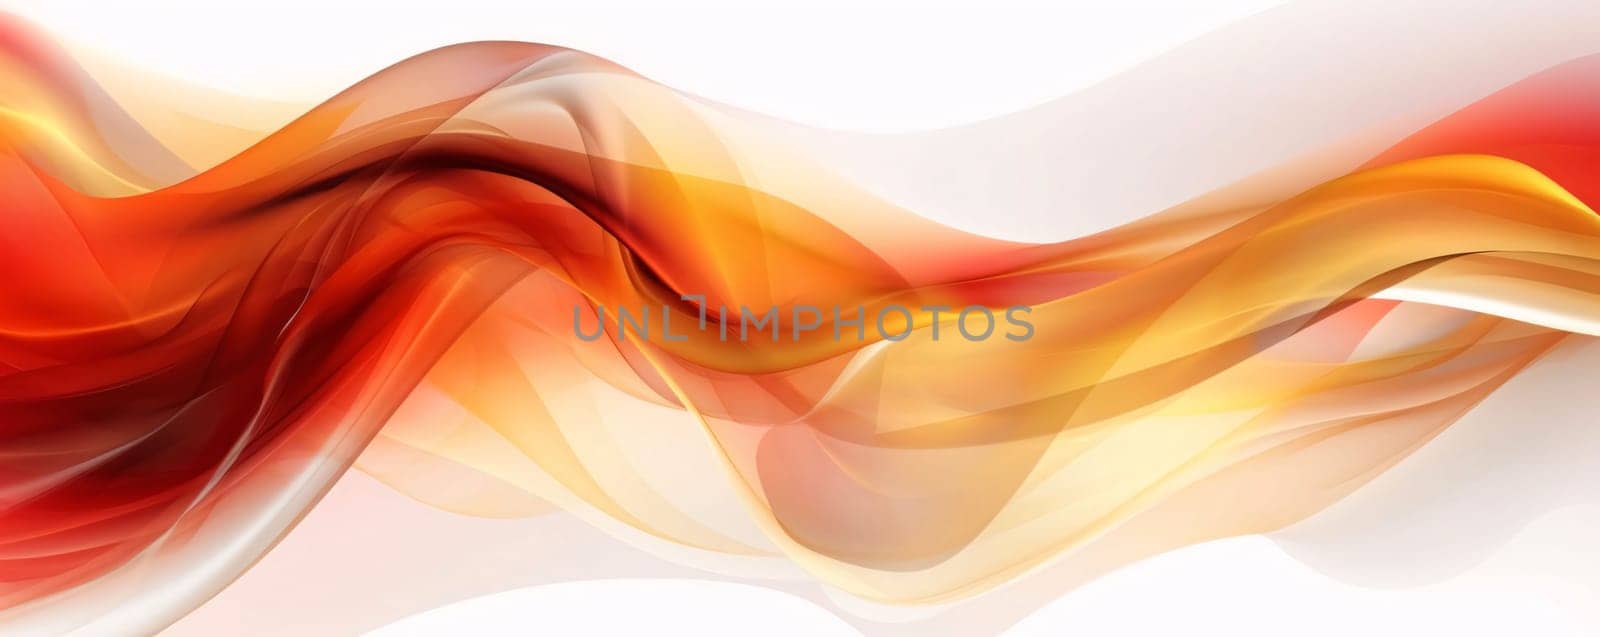 abstract background with smooth flowing orange and red waves, vector illustration by ThemesS